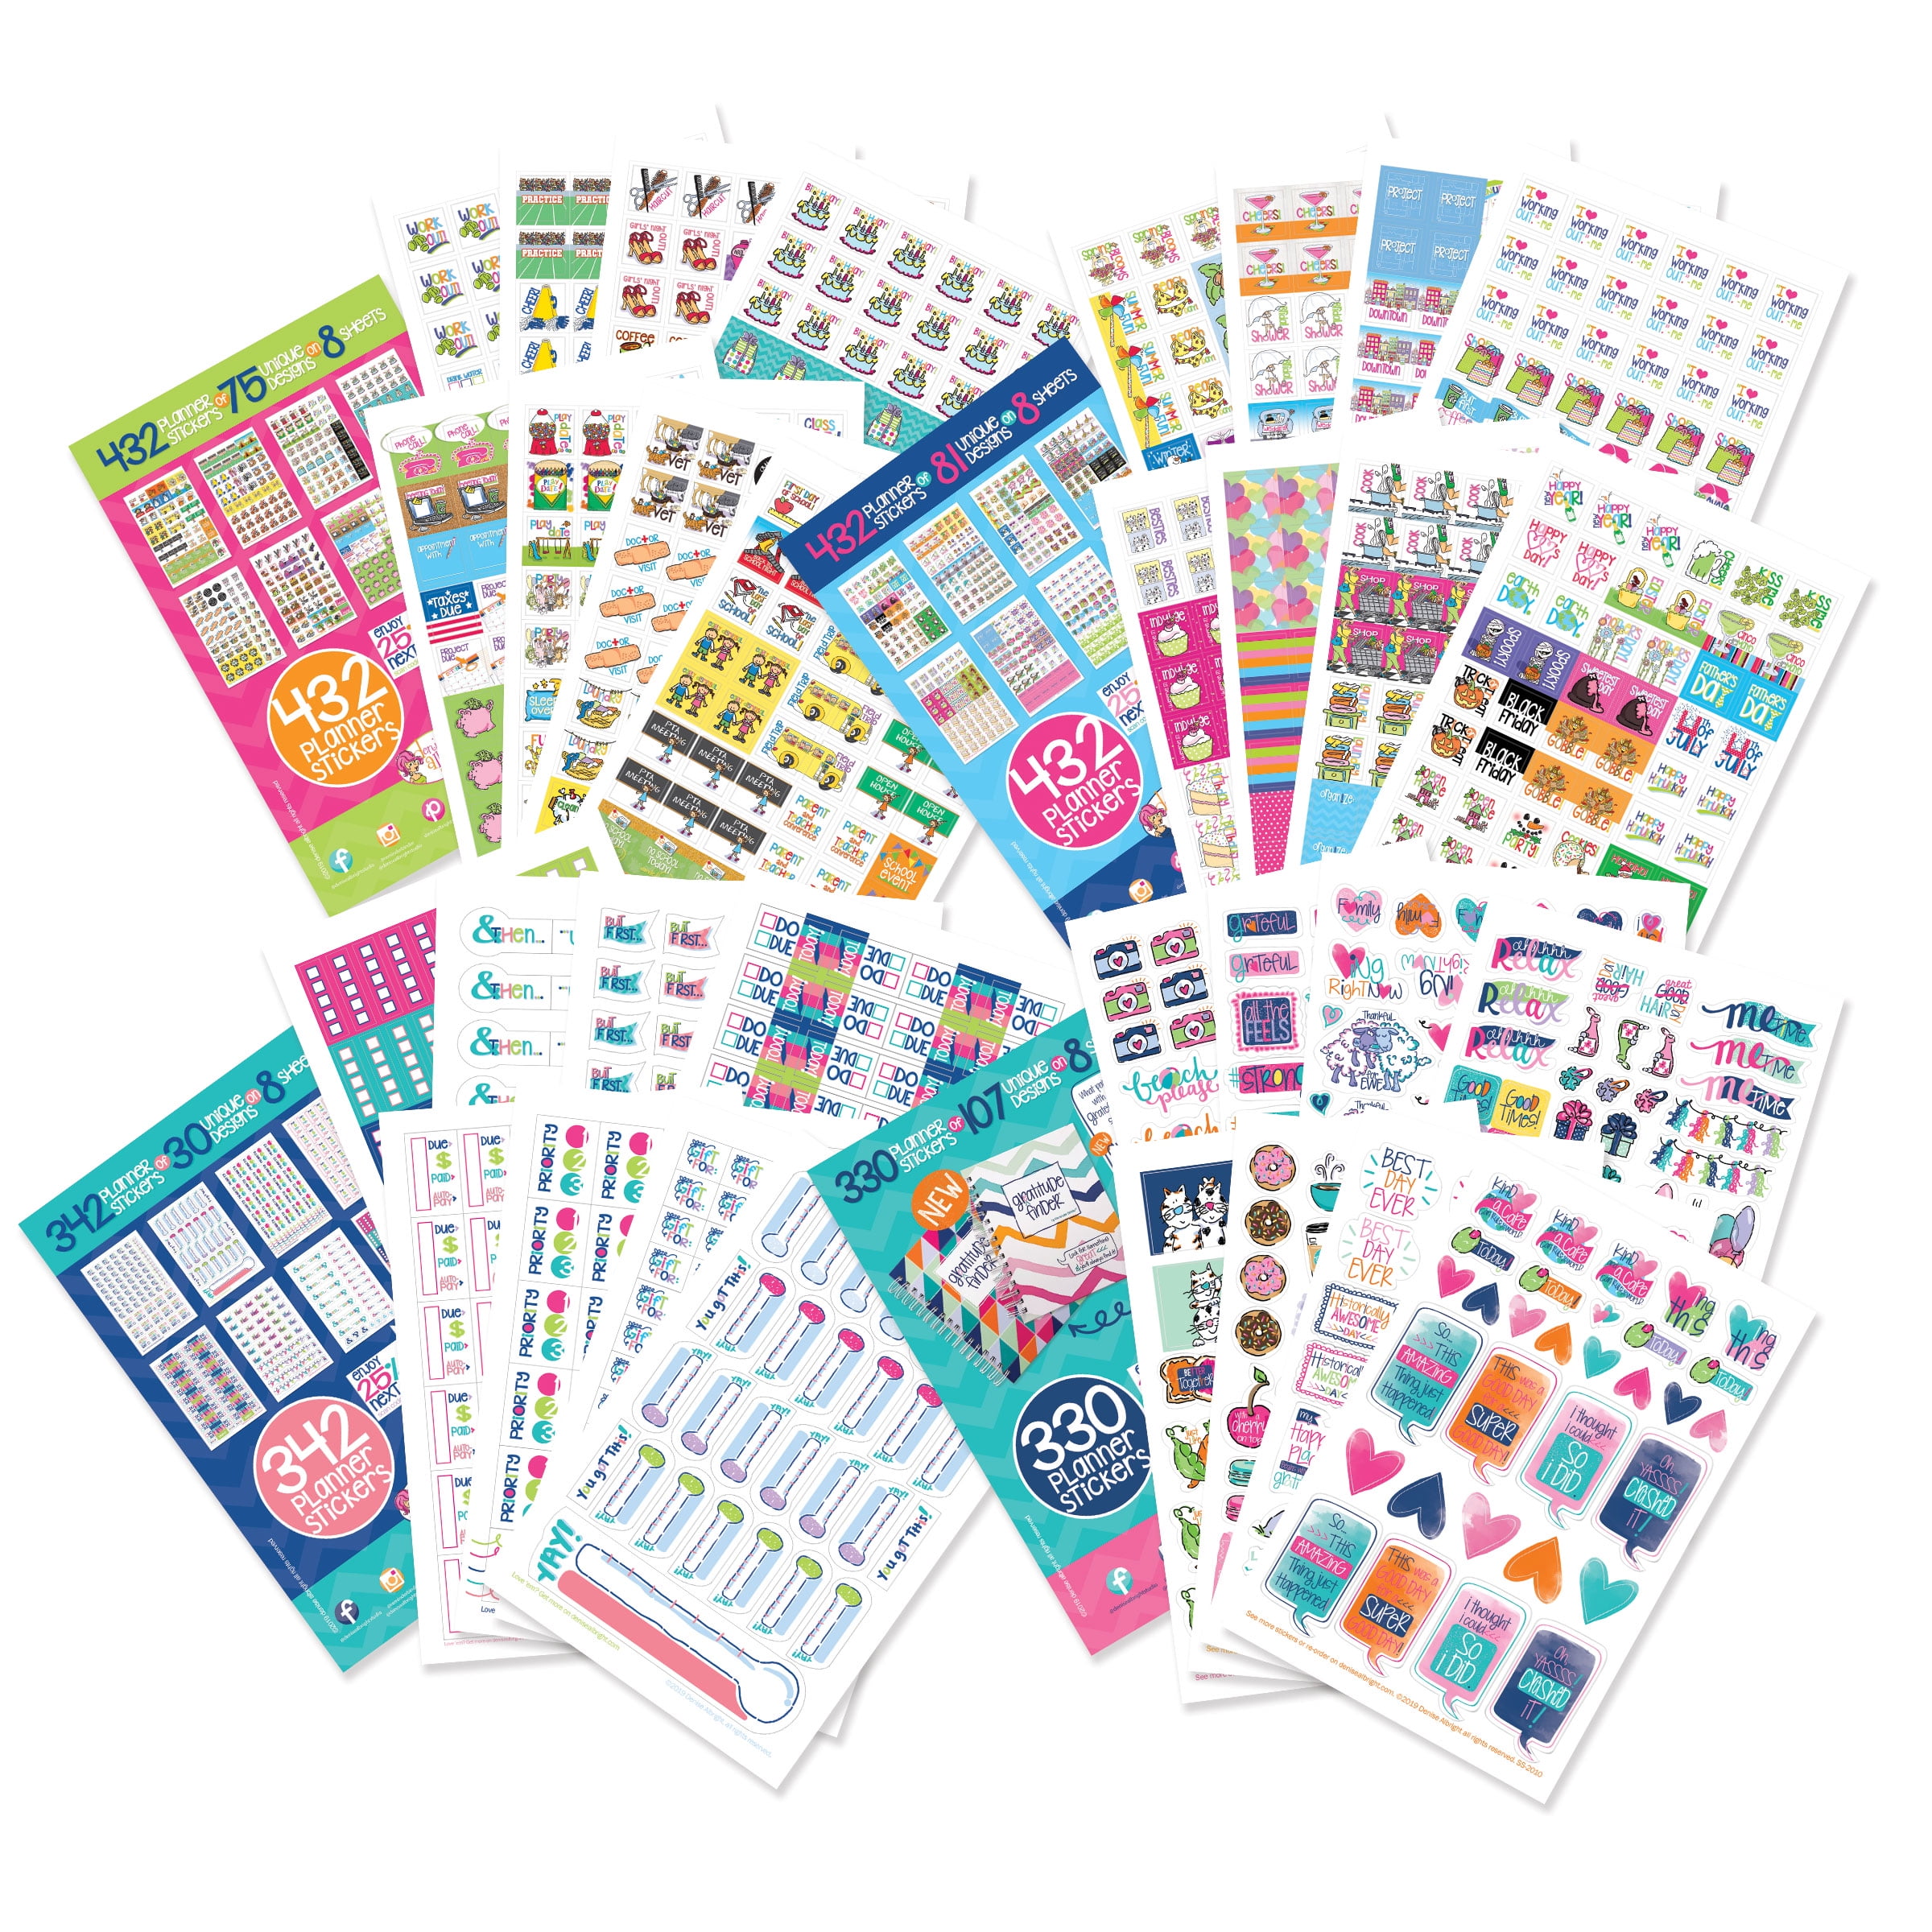 Planner Stickers – Aesthetic Seasonal Calendar Stickers to Decorate &  Improve Your Planner, Calendar, Journal | Monthly Celebrations Accessories  20